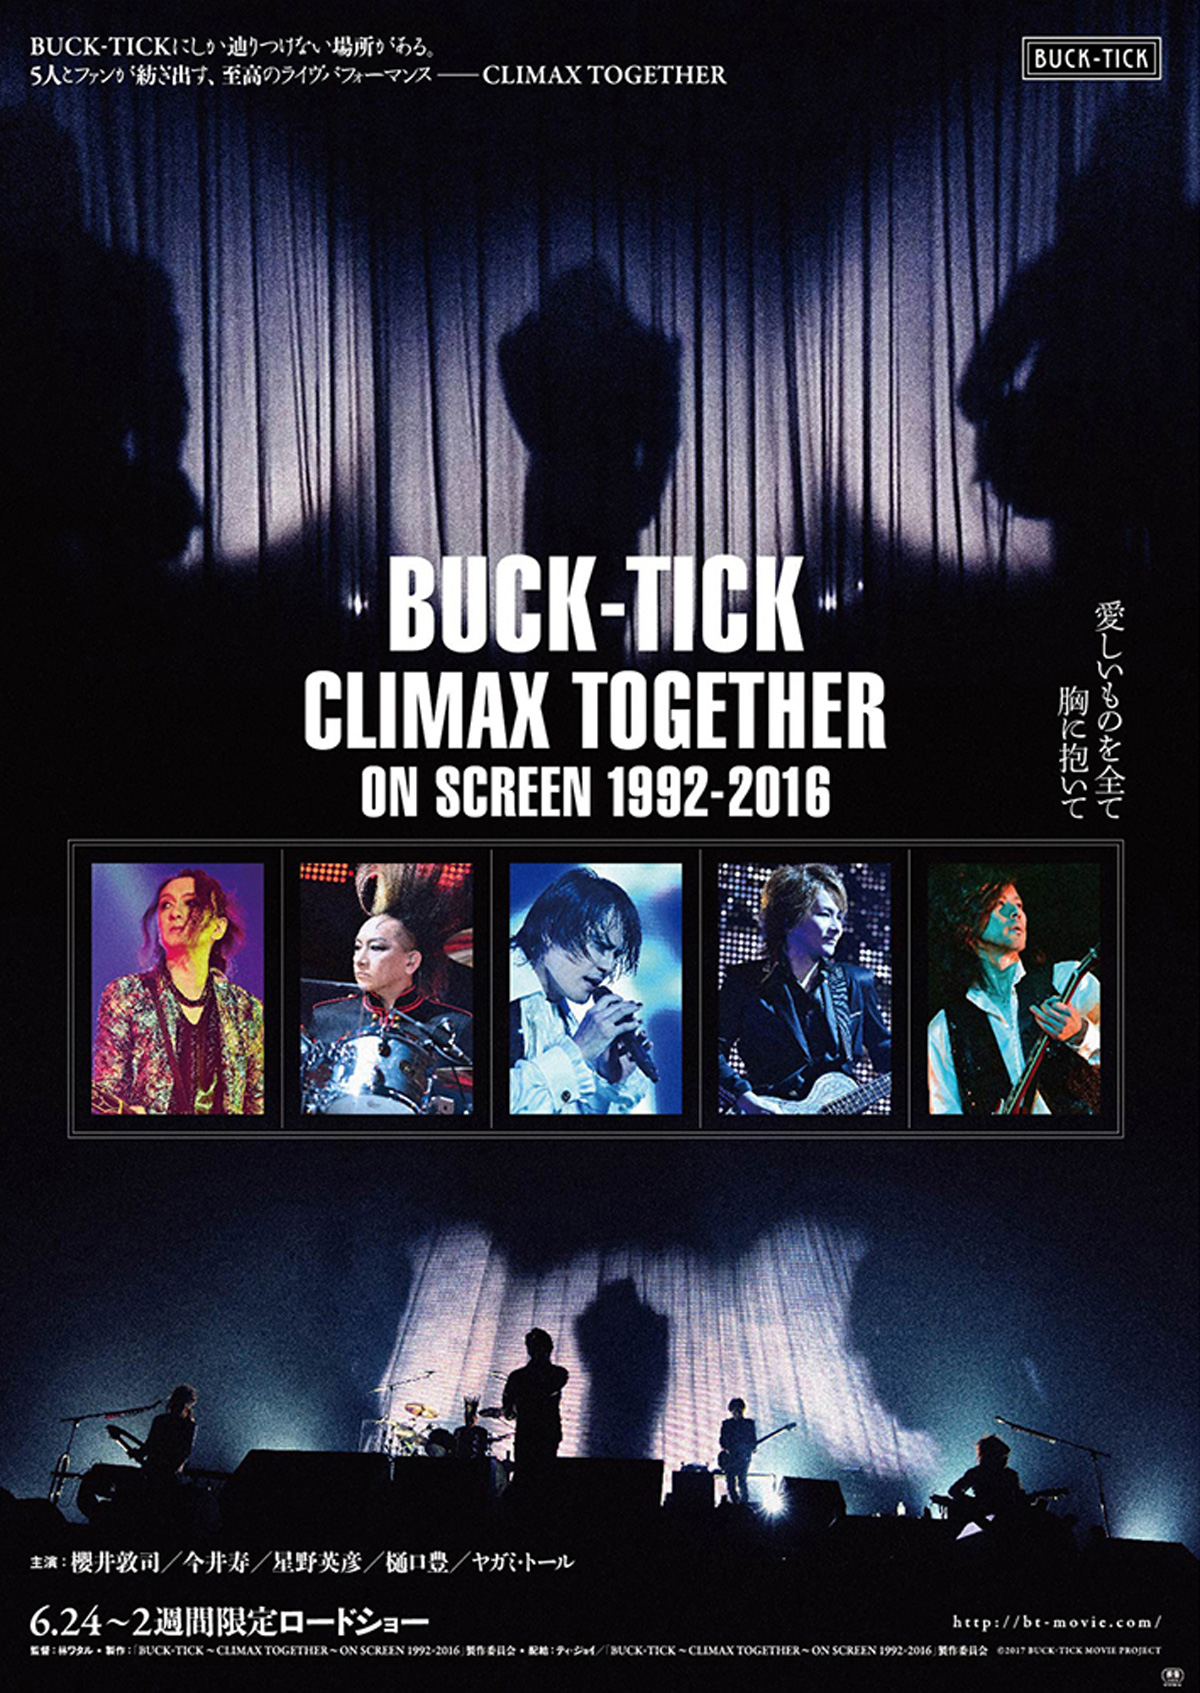 BUCK-TICK～CLIMAX TOGETHER～ON SCREEN 1992-2016の画像